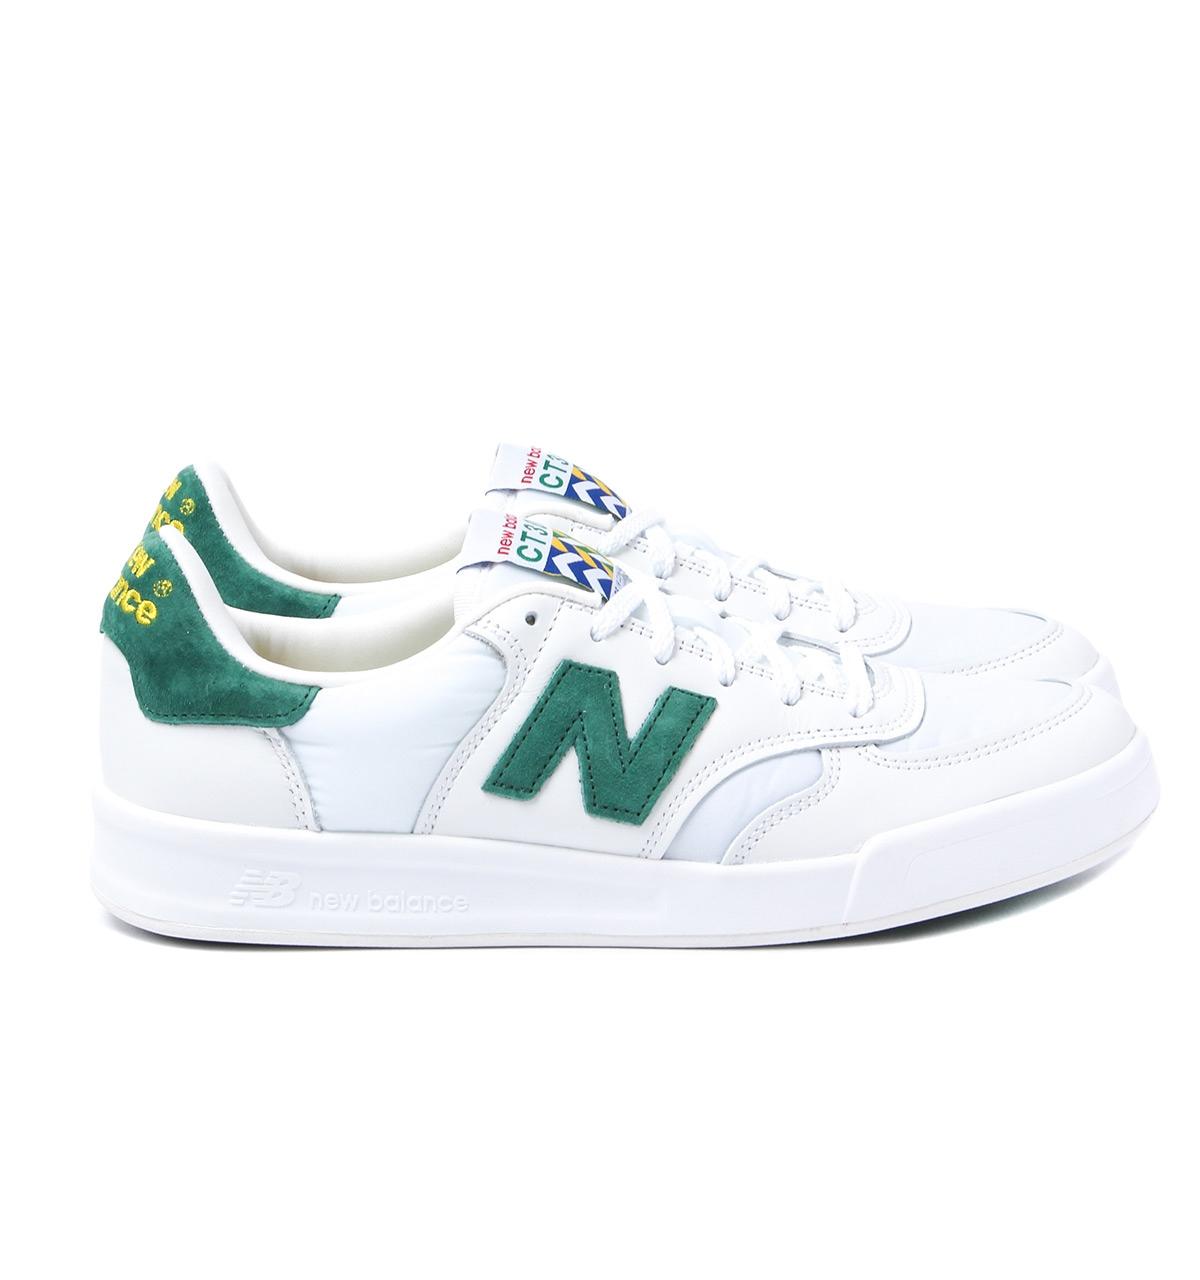 New Balance Ct300 Cf White & Green Made In Cumbria Trainers for Men | Lyst